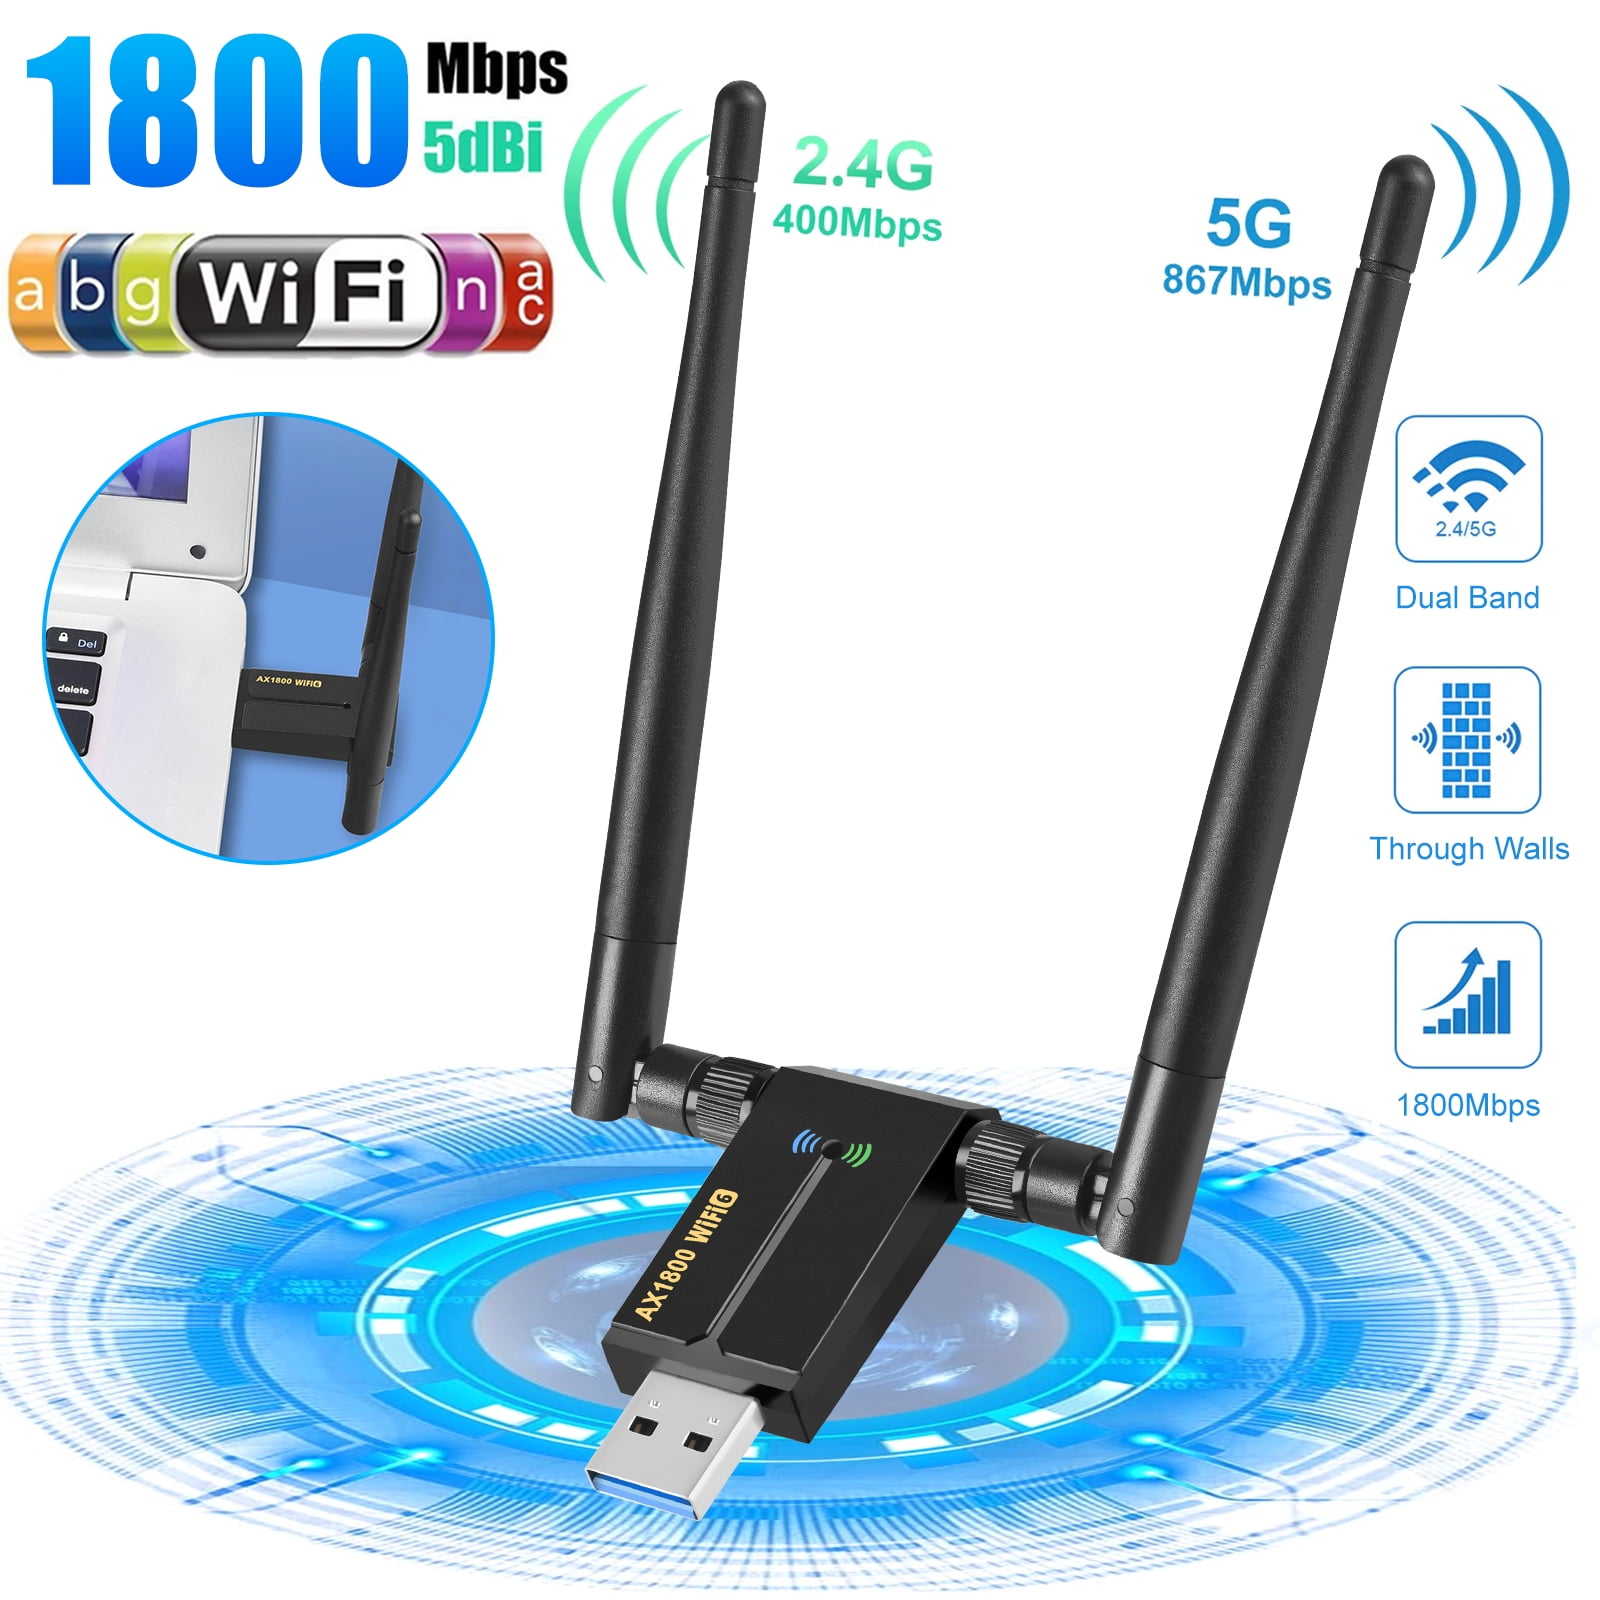 USB WiFi 6 Adapter for PC, TSV AX1800Mbps Dual Band 2.4GHz/5GHz